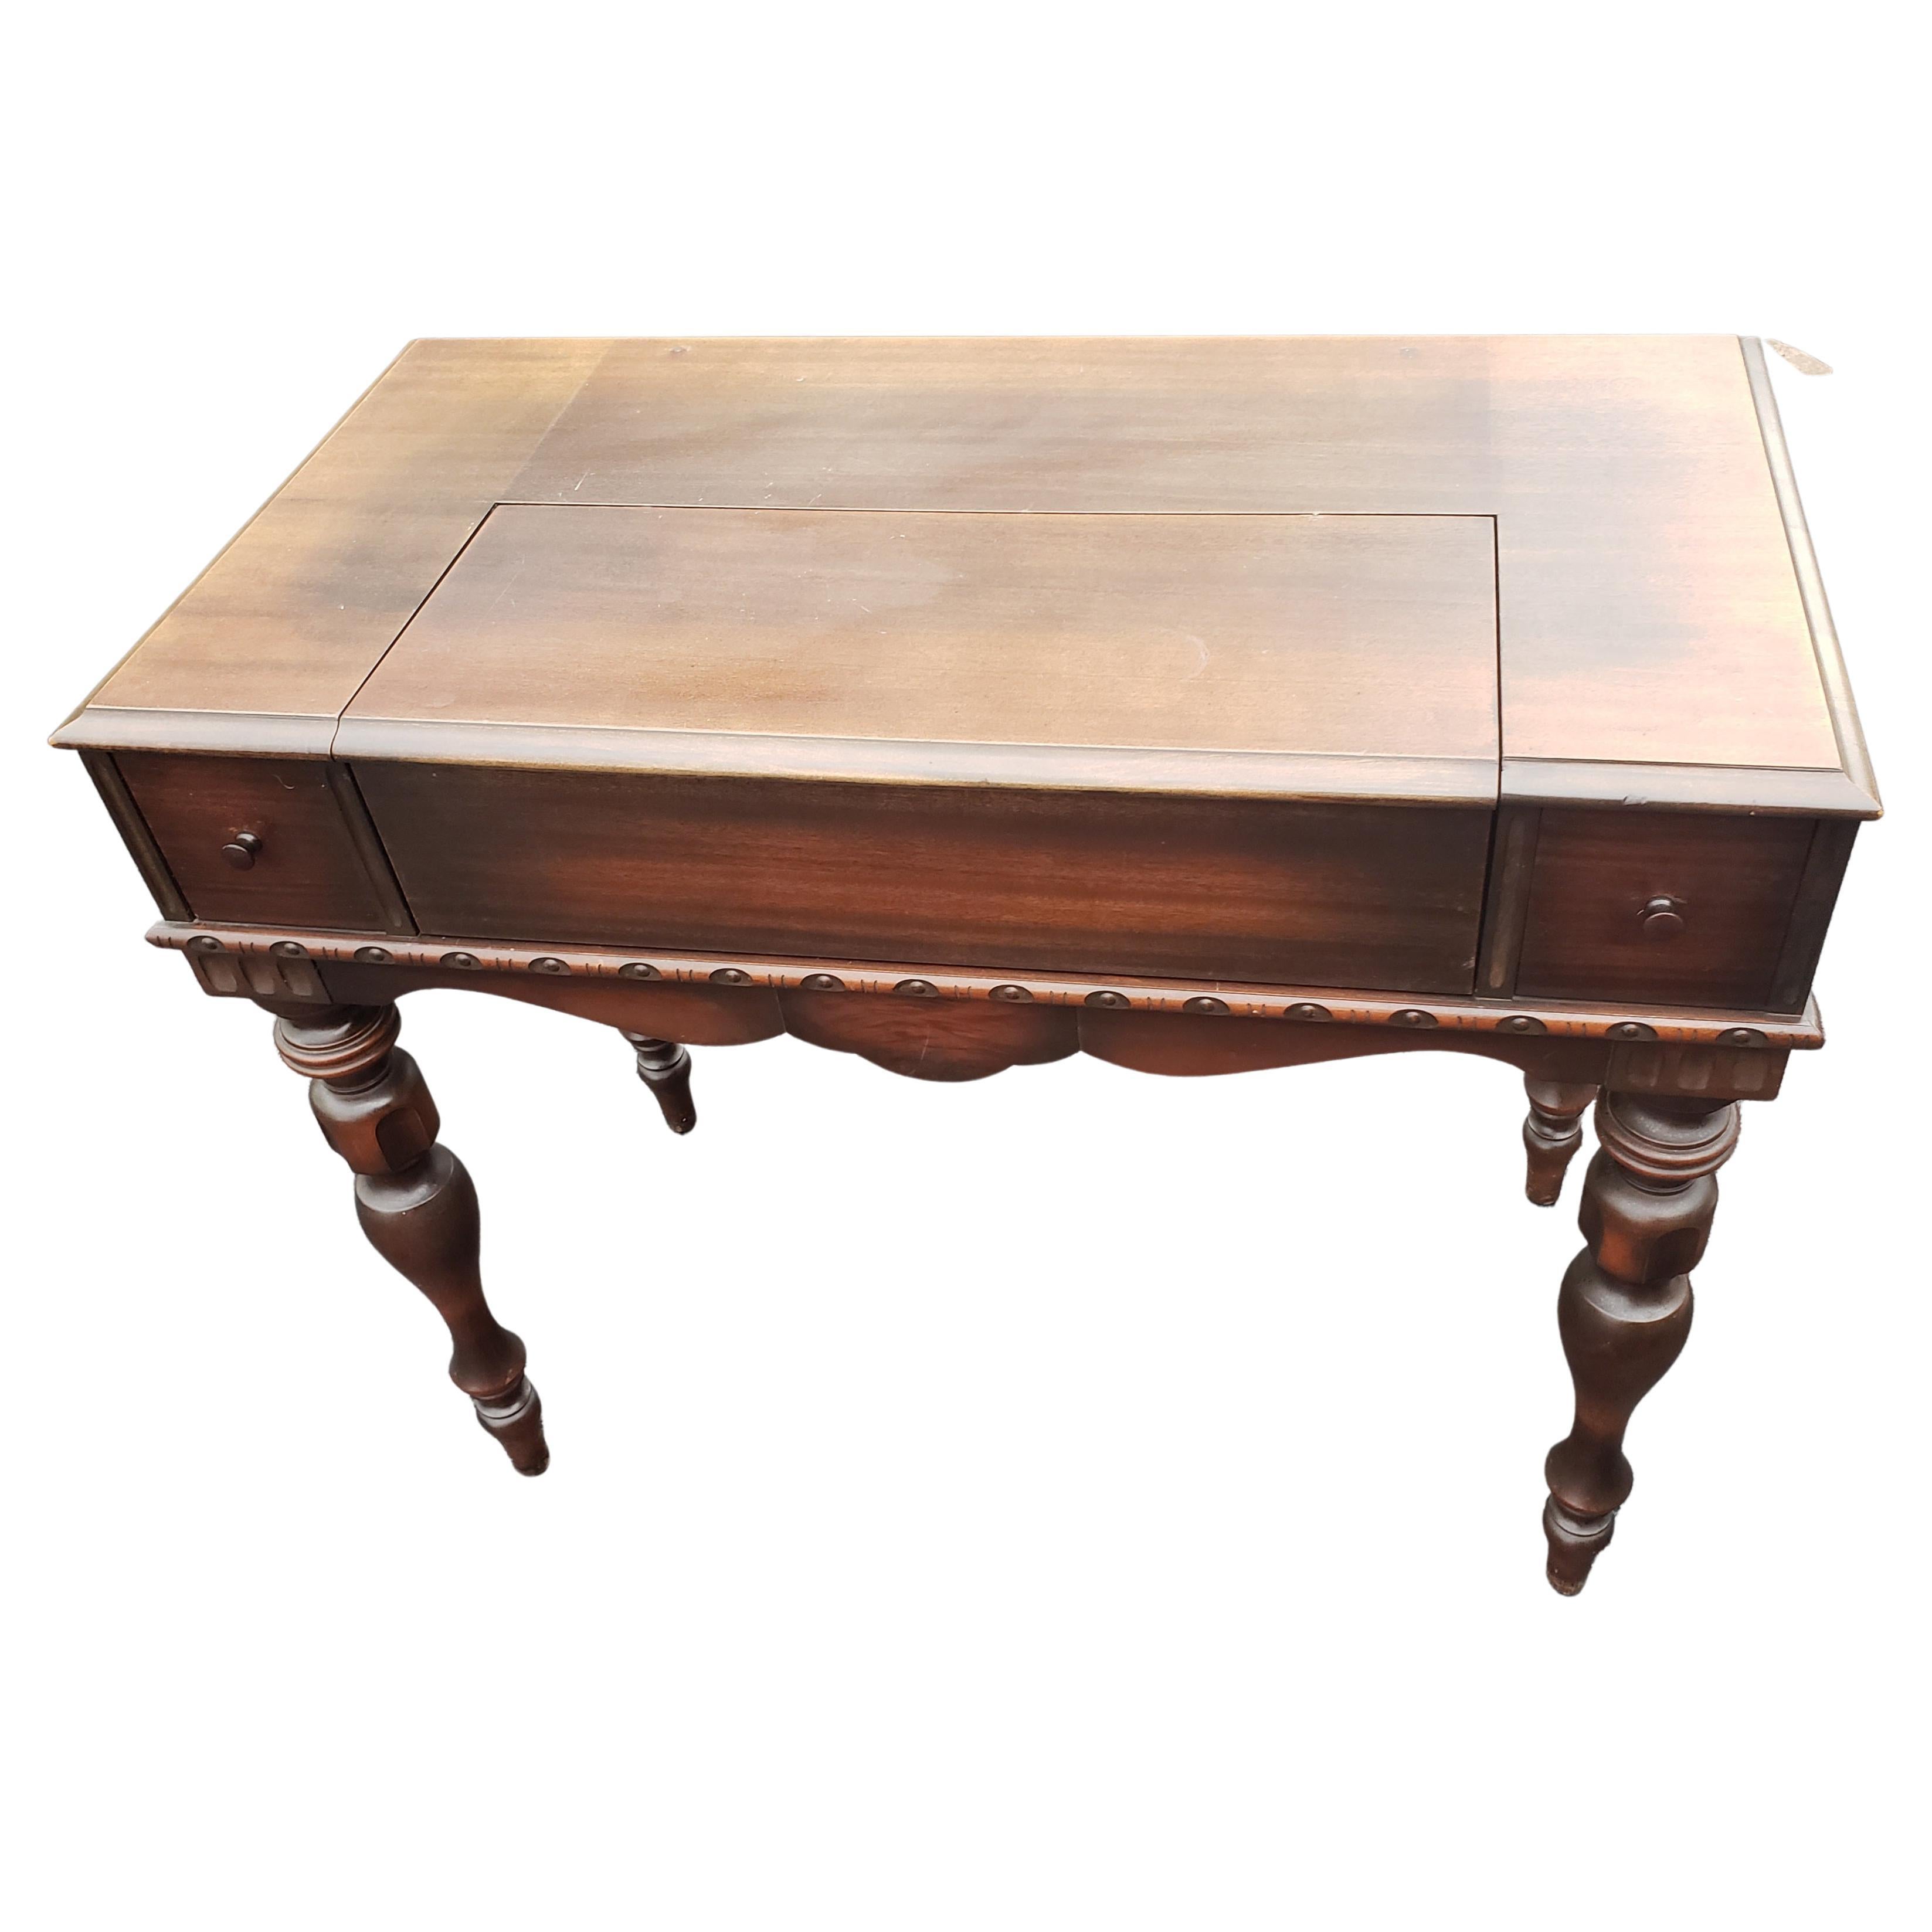 Versatile Edwardian style writing that can be used as console table, Sofa table or as a hall table. Simple yet elegant carving on edges. Pull out tray to make create more writing area. Plenty of storage space with Two Deep dovetailed drawers on each